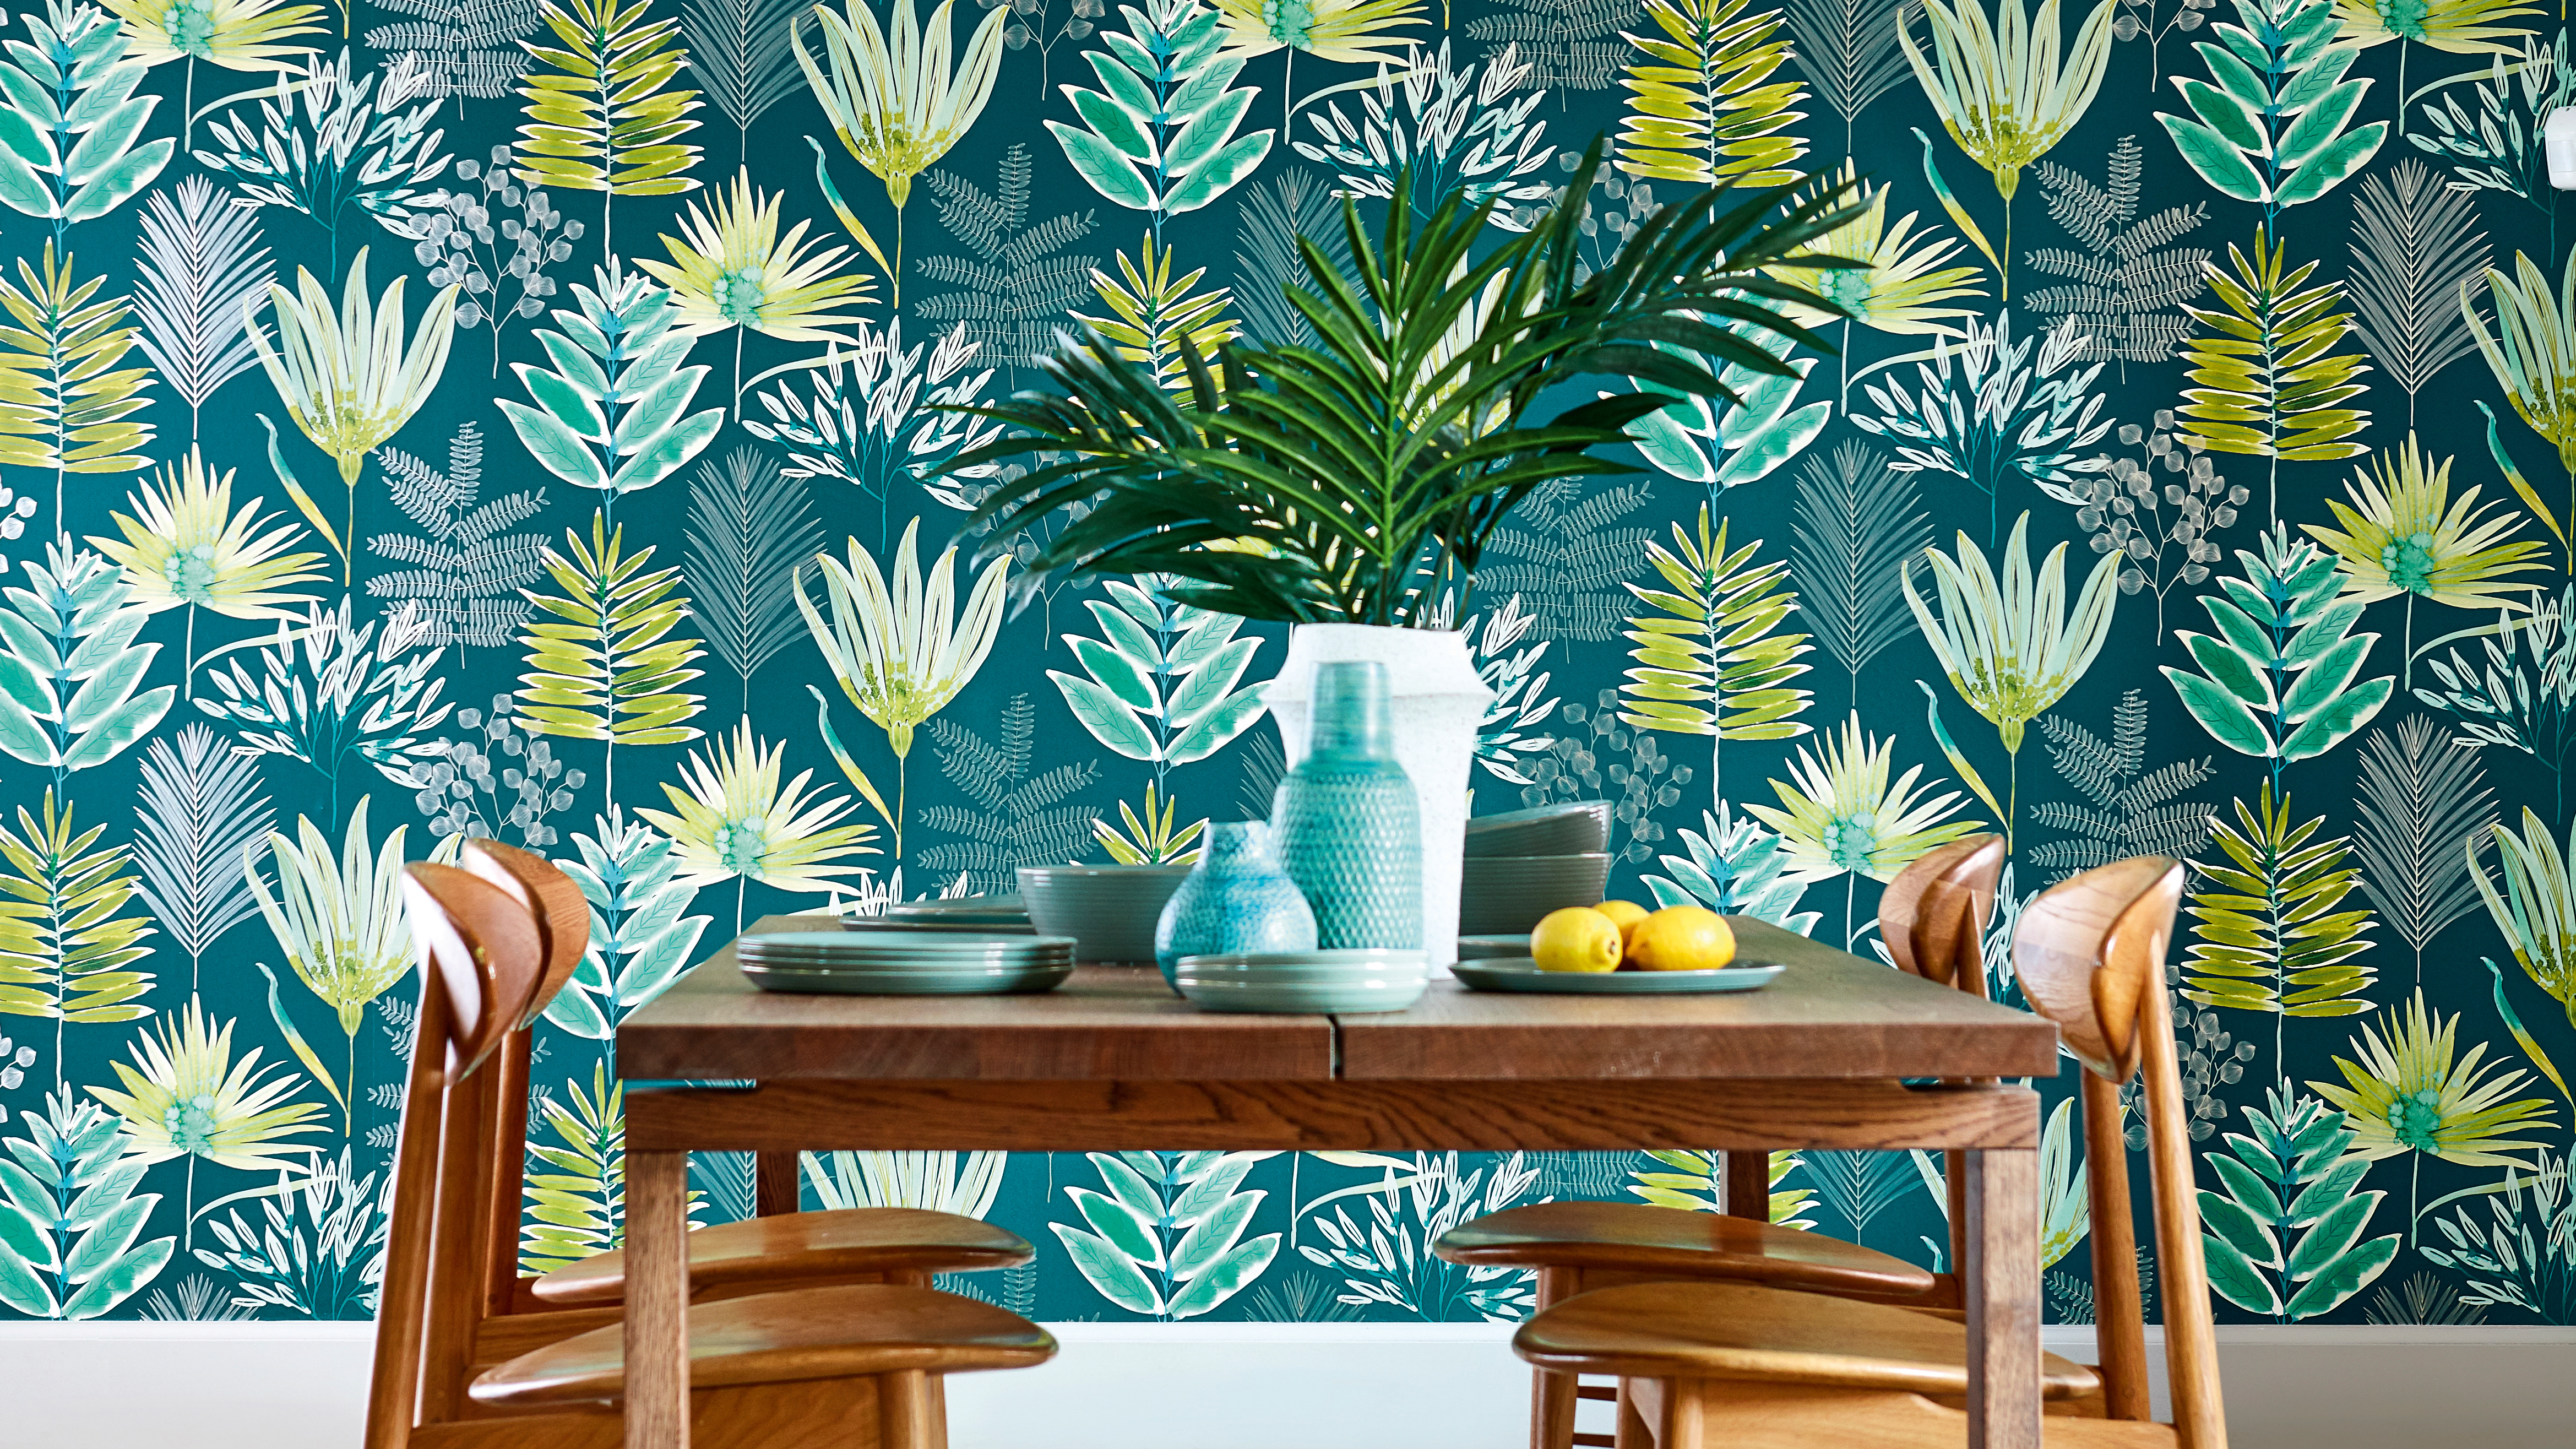 Botanical Wallpaper Fabulous Floral Leaf And Plant Inspired